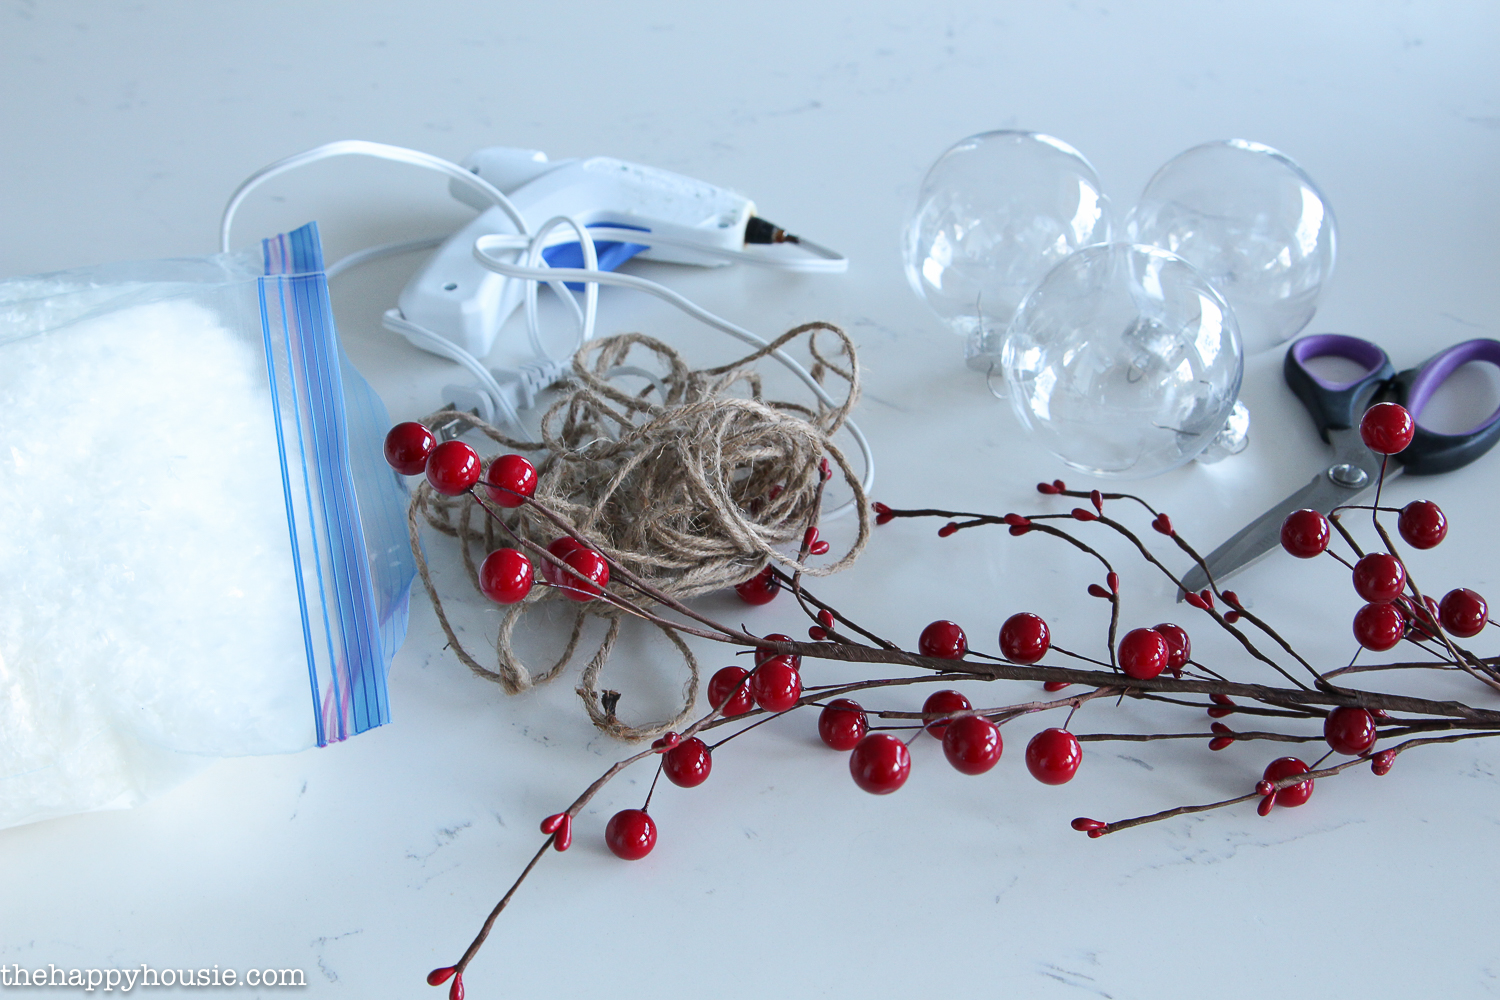 A branch of red berries, scissors and twine on the table.